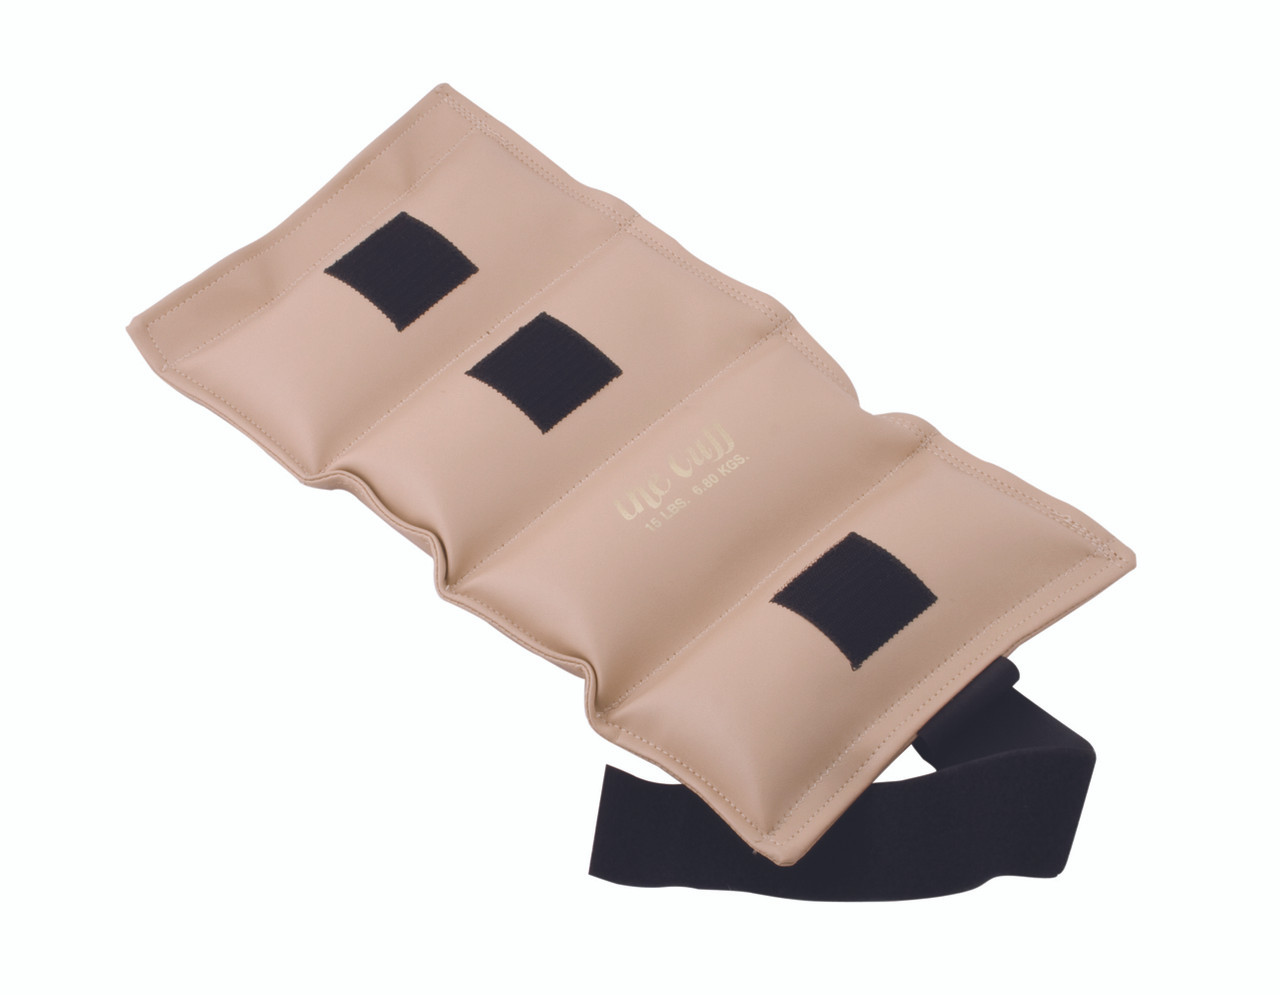 The Cuff¨ Deluxe Ankle and Wrist Weight - 15 lb - Tan